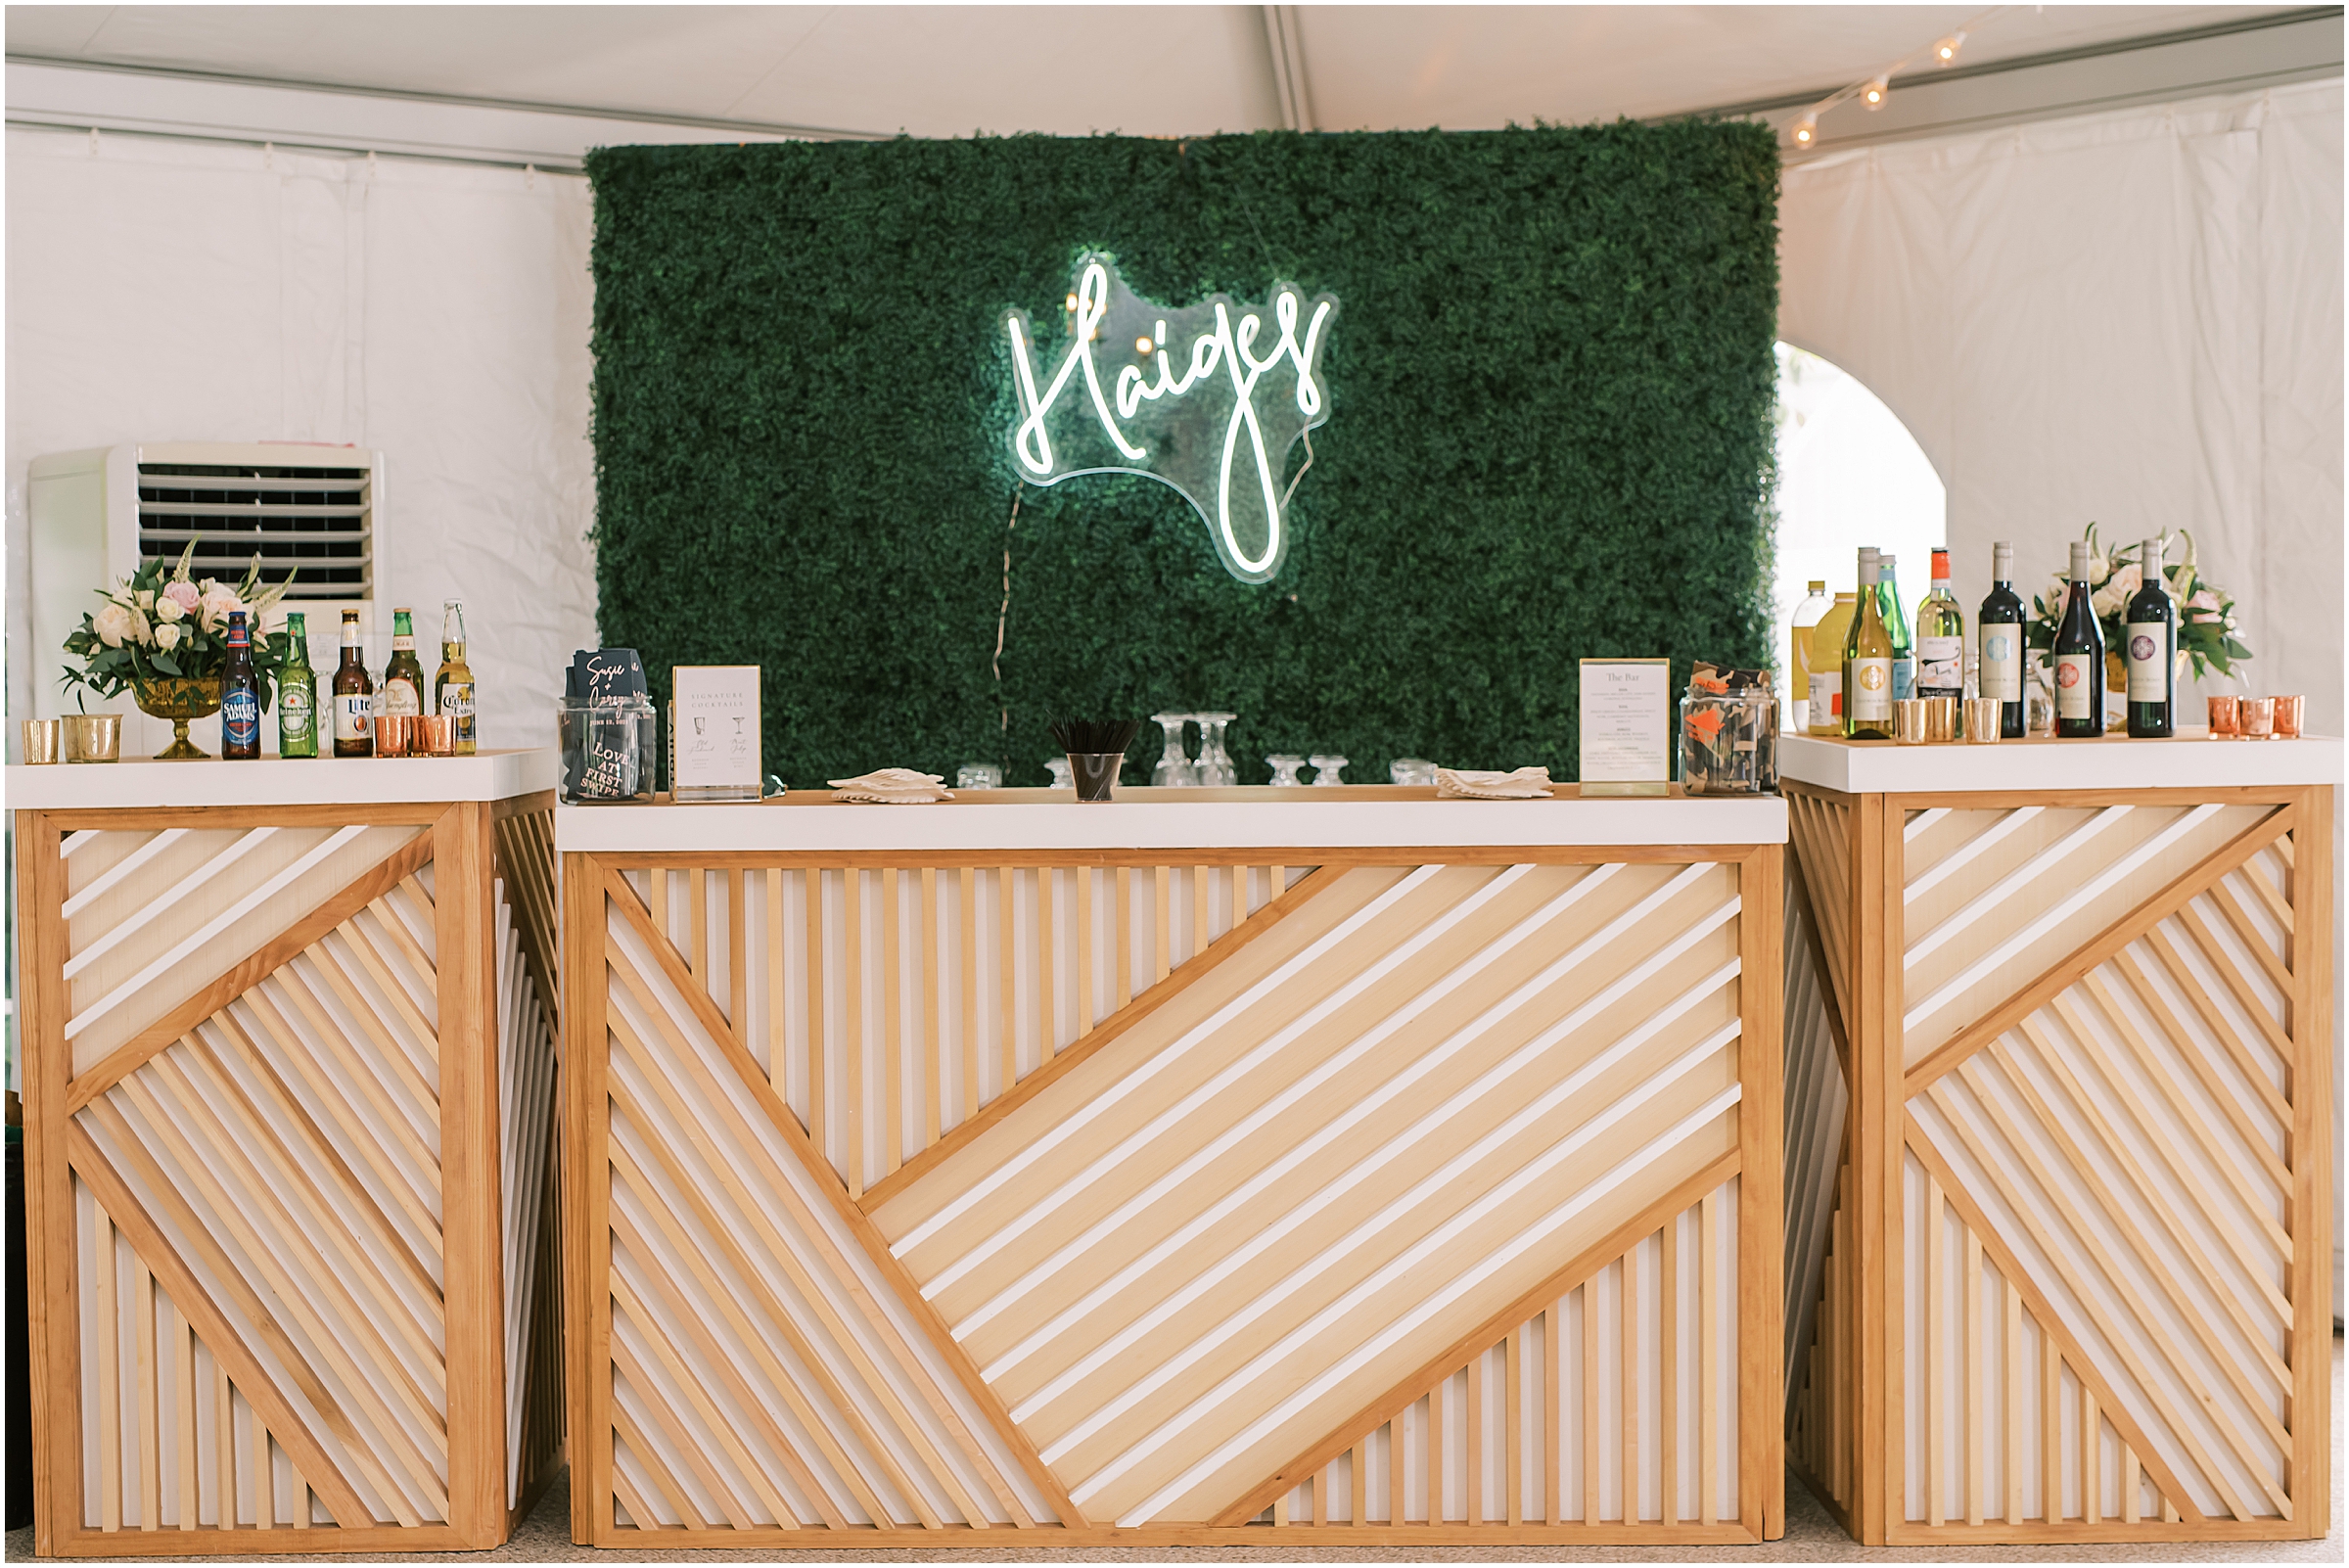 Wedding reception bar with grass wall and neon sign